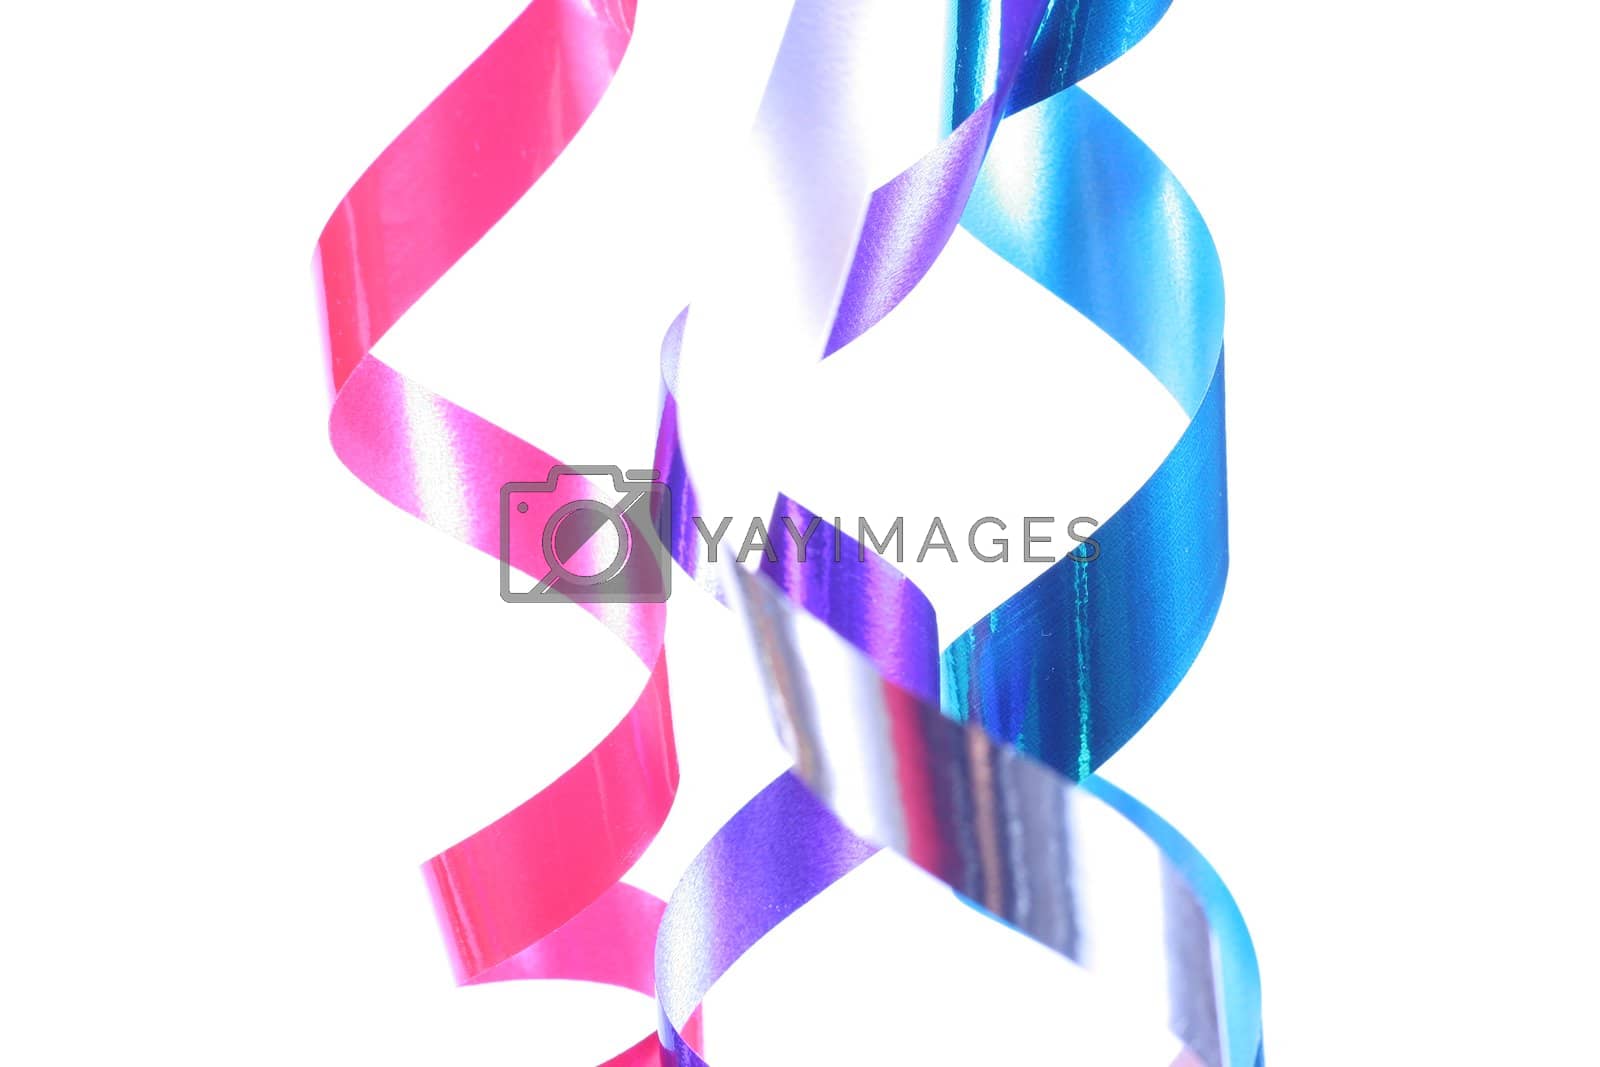 Royalty free image of Shiny colorful satin ribbons by jarenwicklund